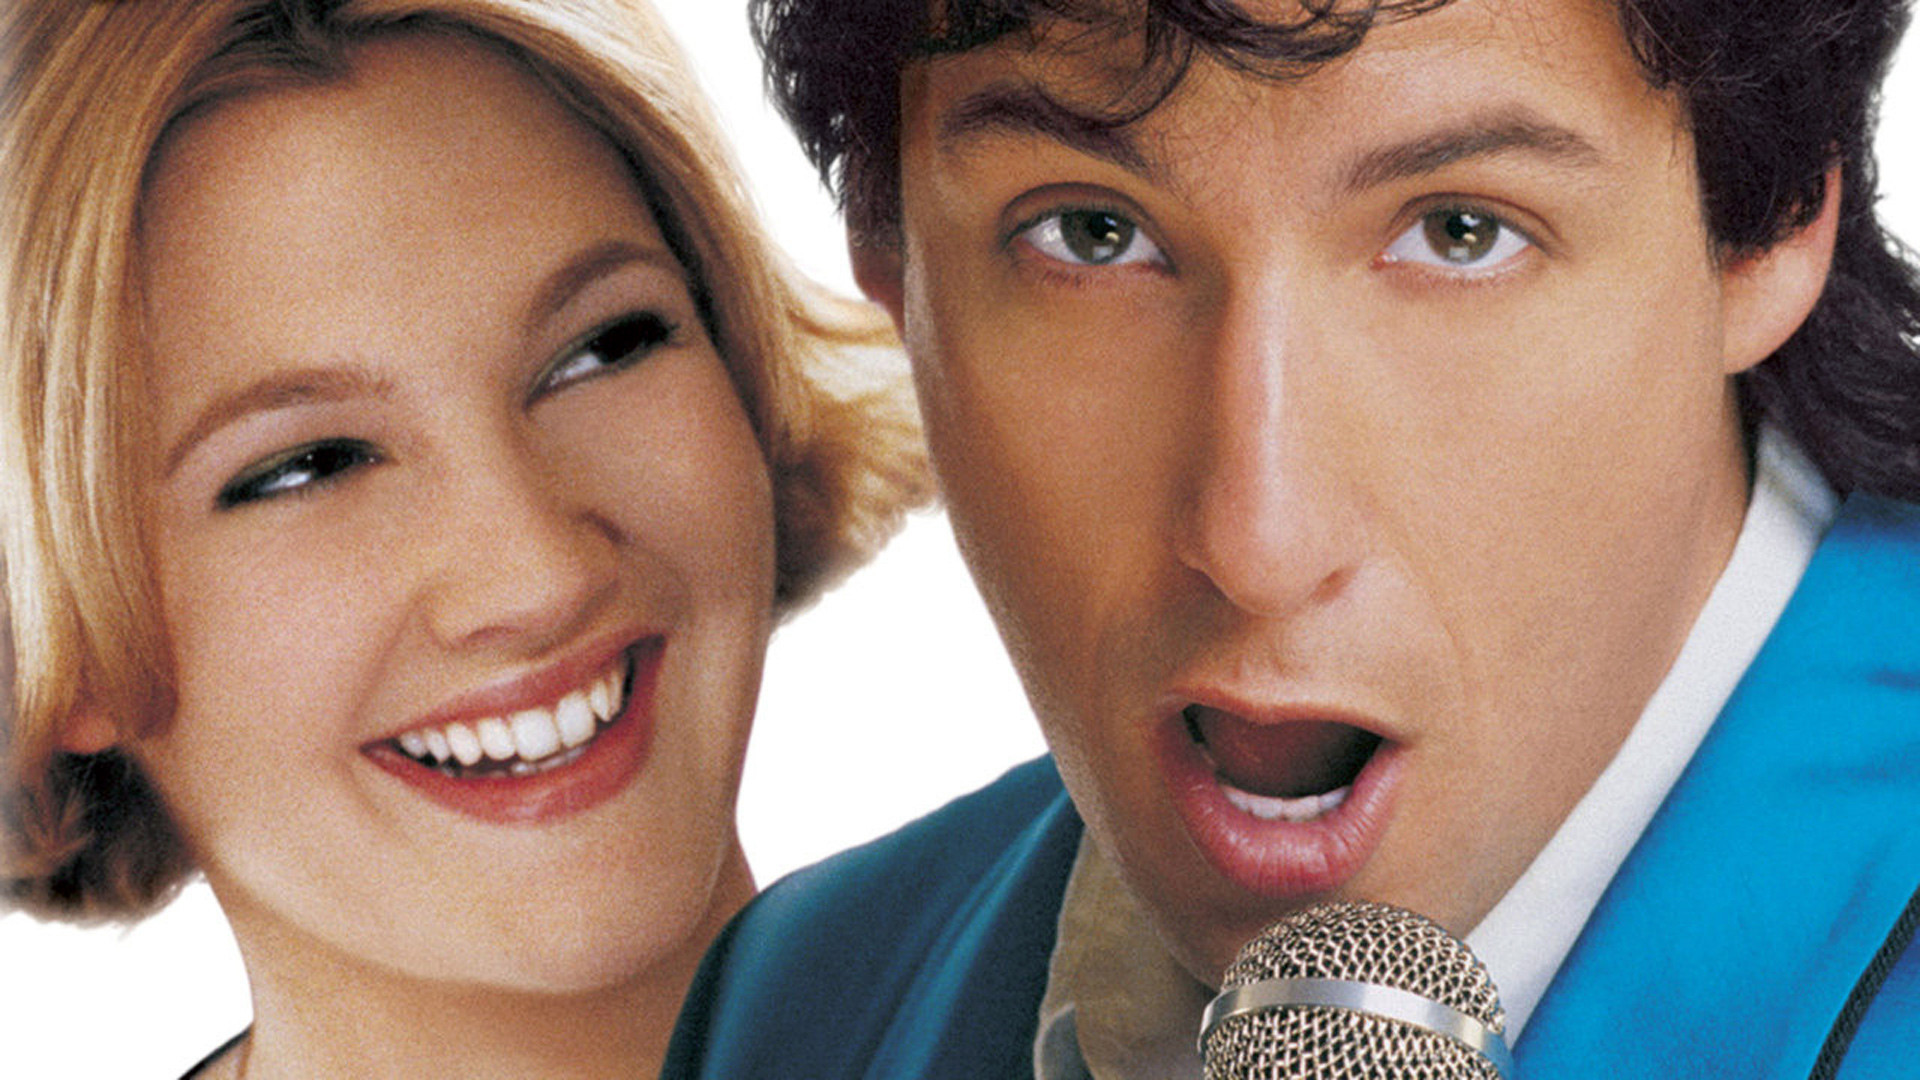 The wedding singer picture